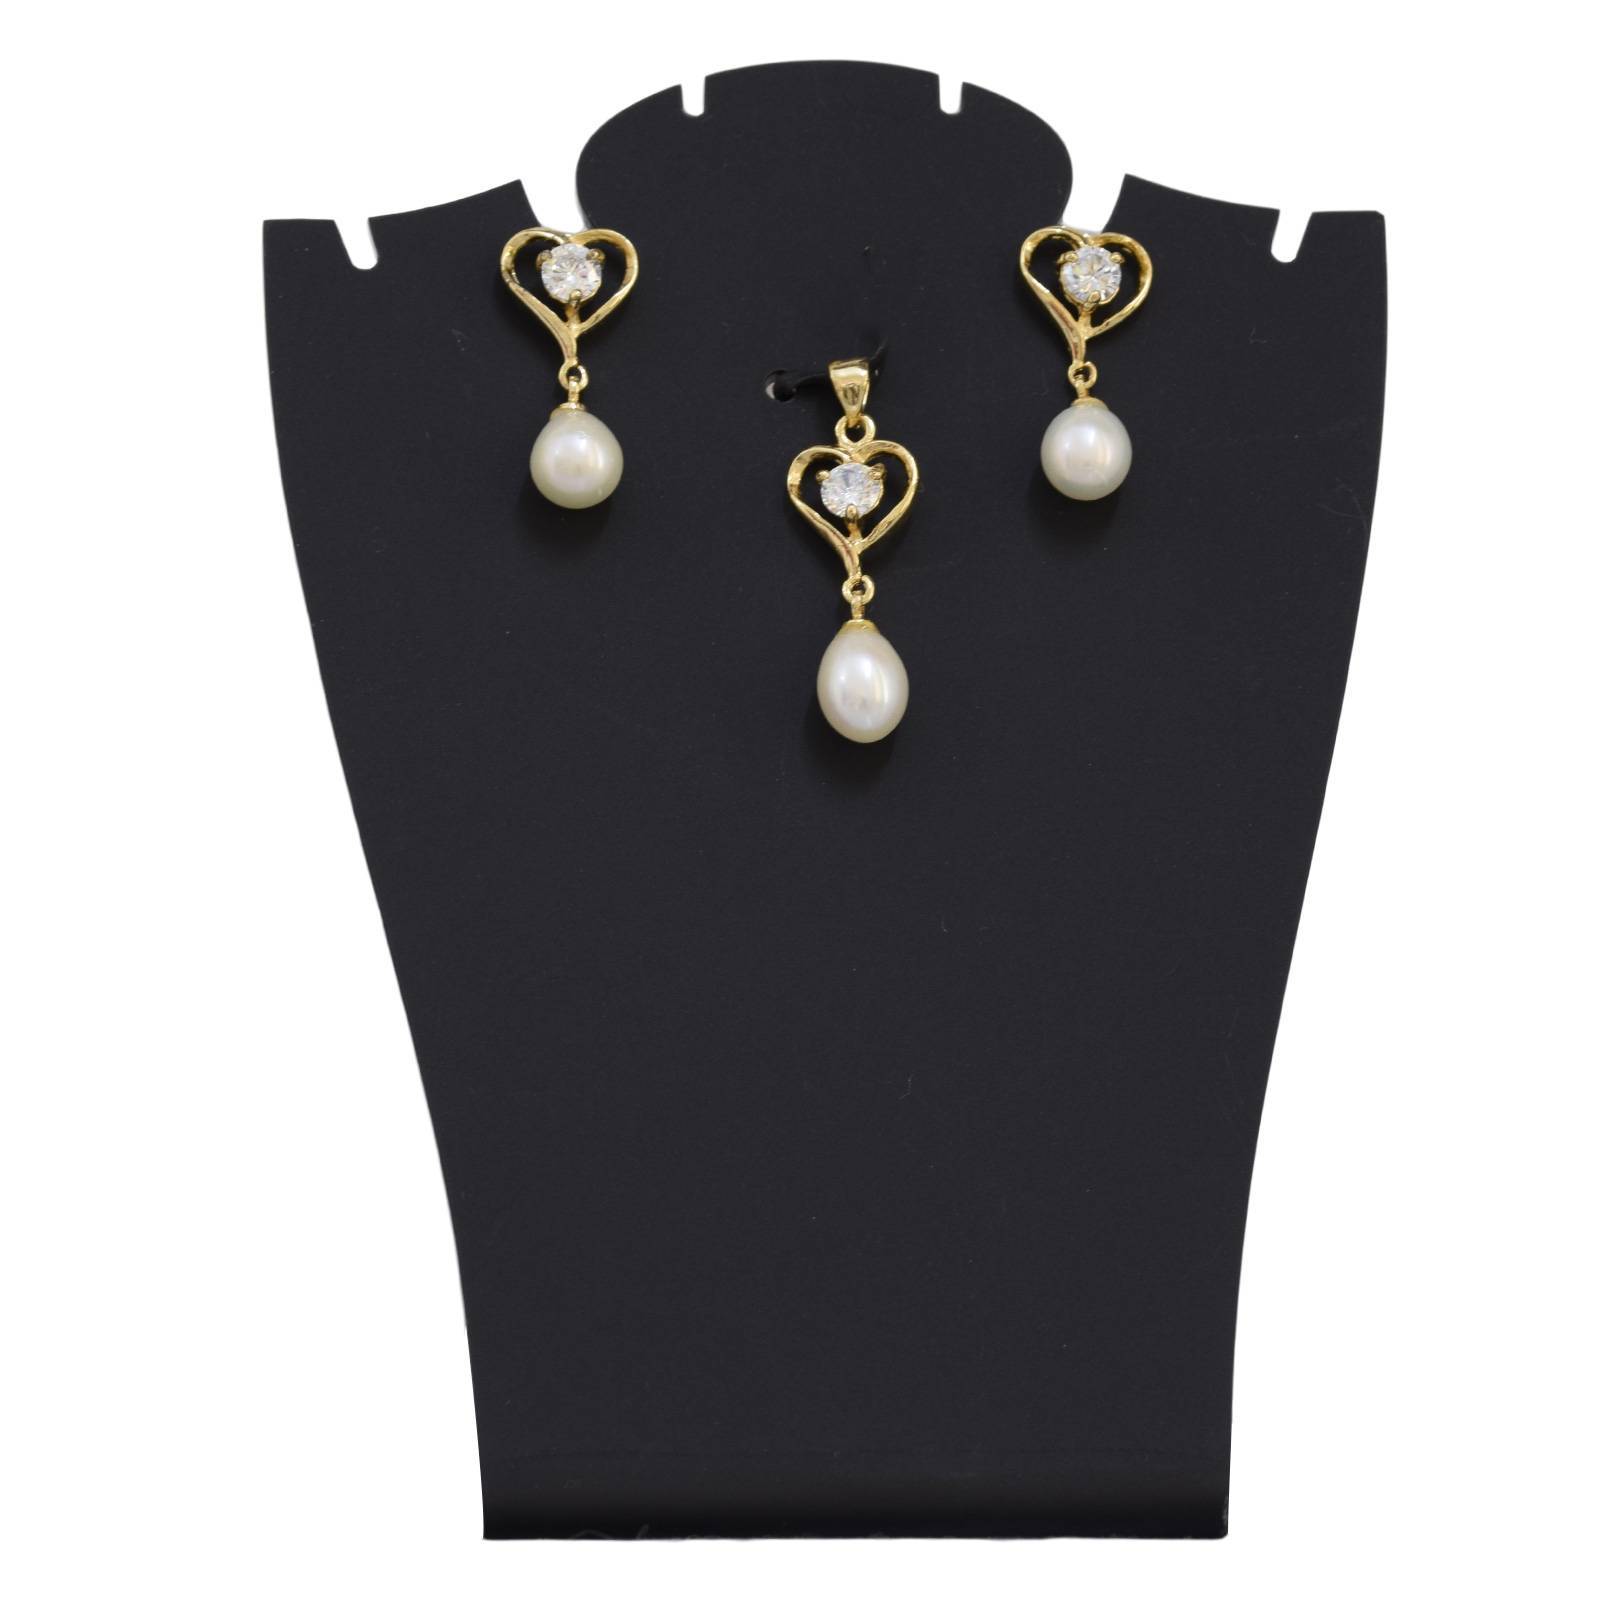 Buy Diamond Choker Necklace Set, Big Pearl Necklace, Pearl Earrings, & Earring  Set, Necklace Pearl Set, Big Pearl Necklace Designs, Huge Pearl Earrings,  Shop From The Latest Collection Of Earrings For Women